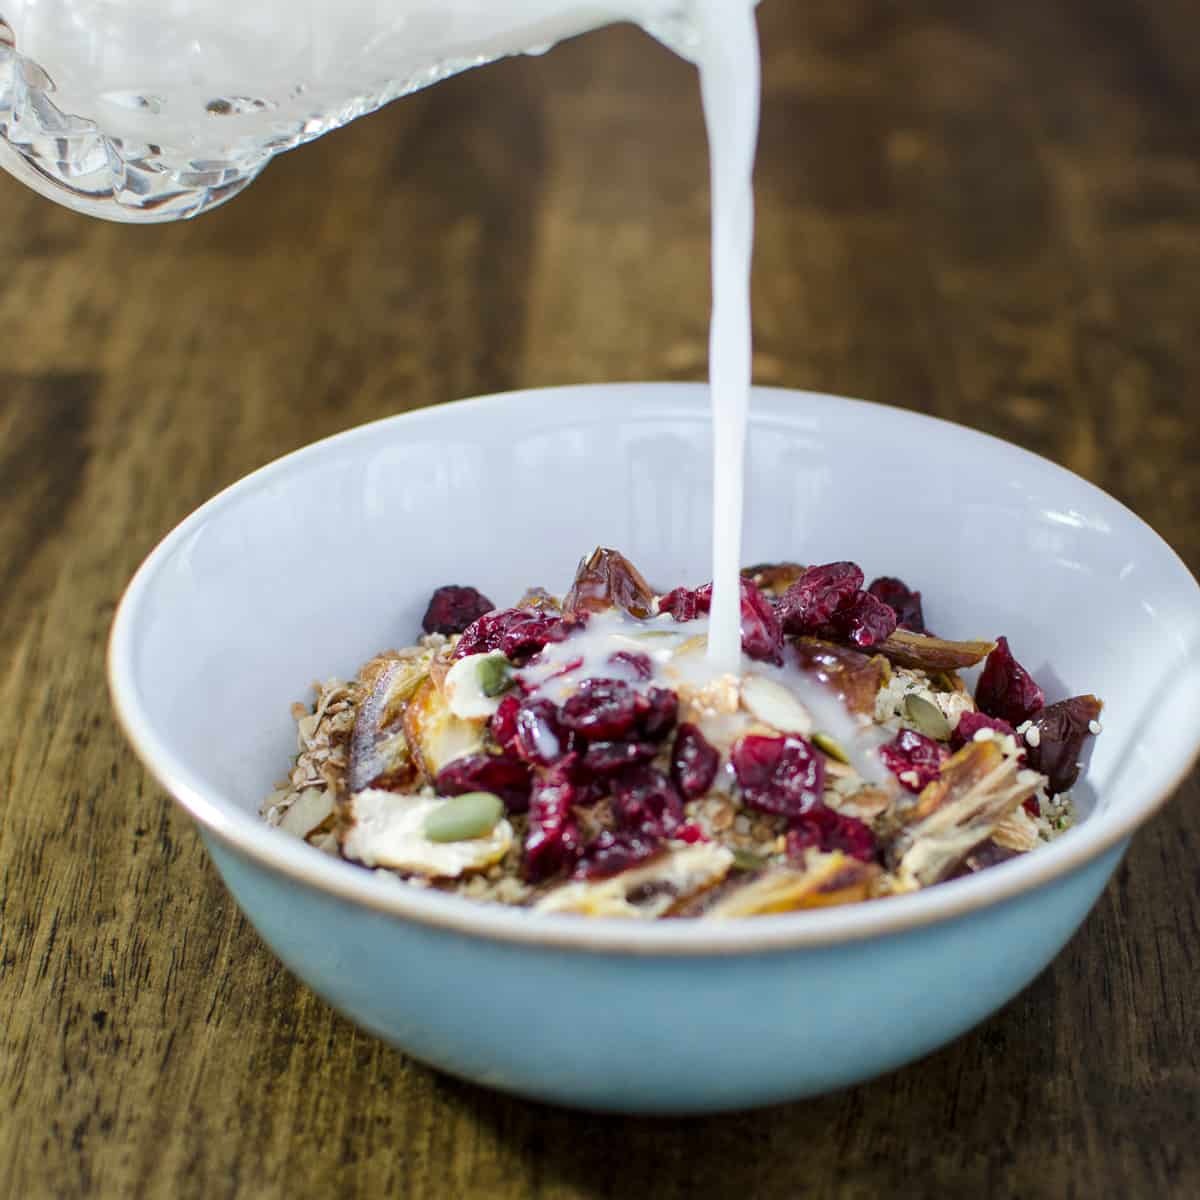 plant milk being poured over old-fashioned oats, dried fruit, and seeds mixture